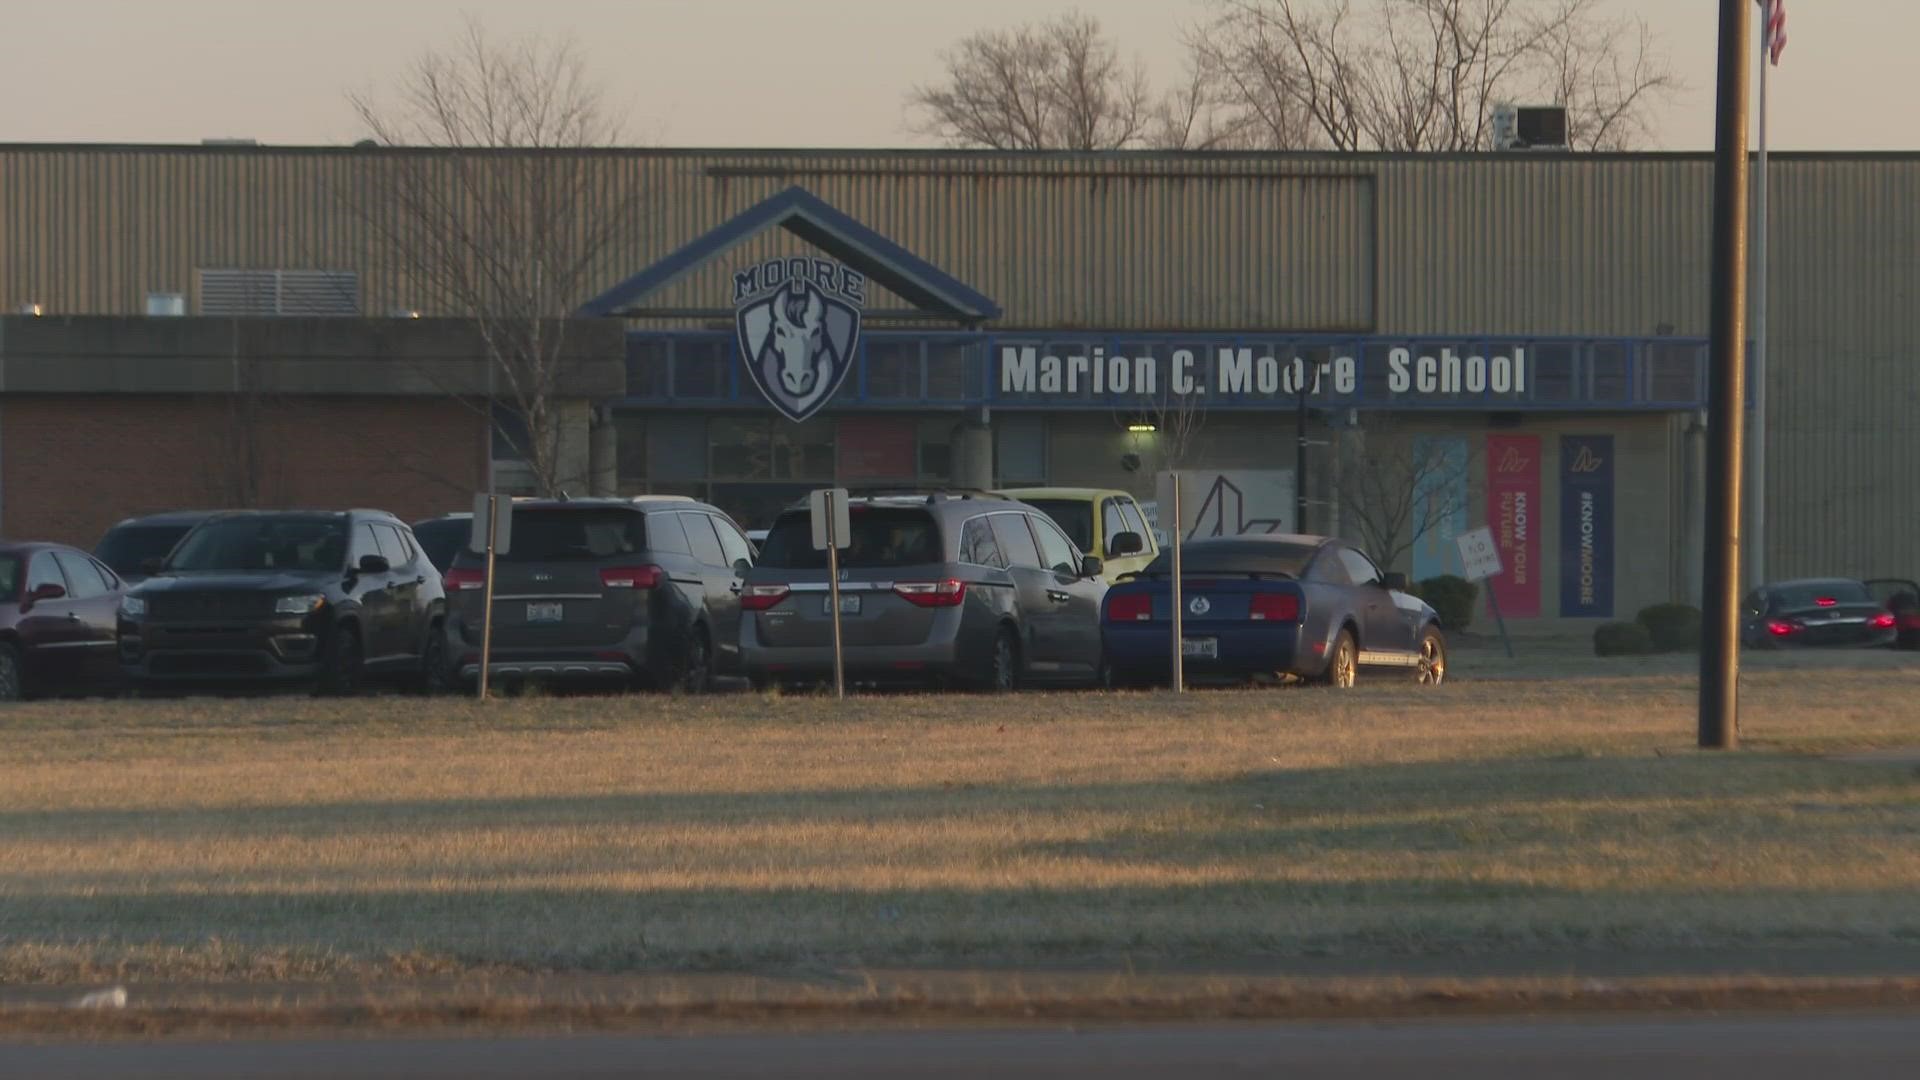 JCPS officials said the students were hit in the crosswalk at the school early Monday. Both are expected to be okay.